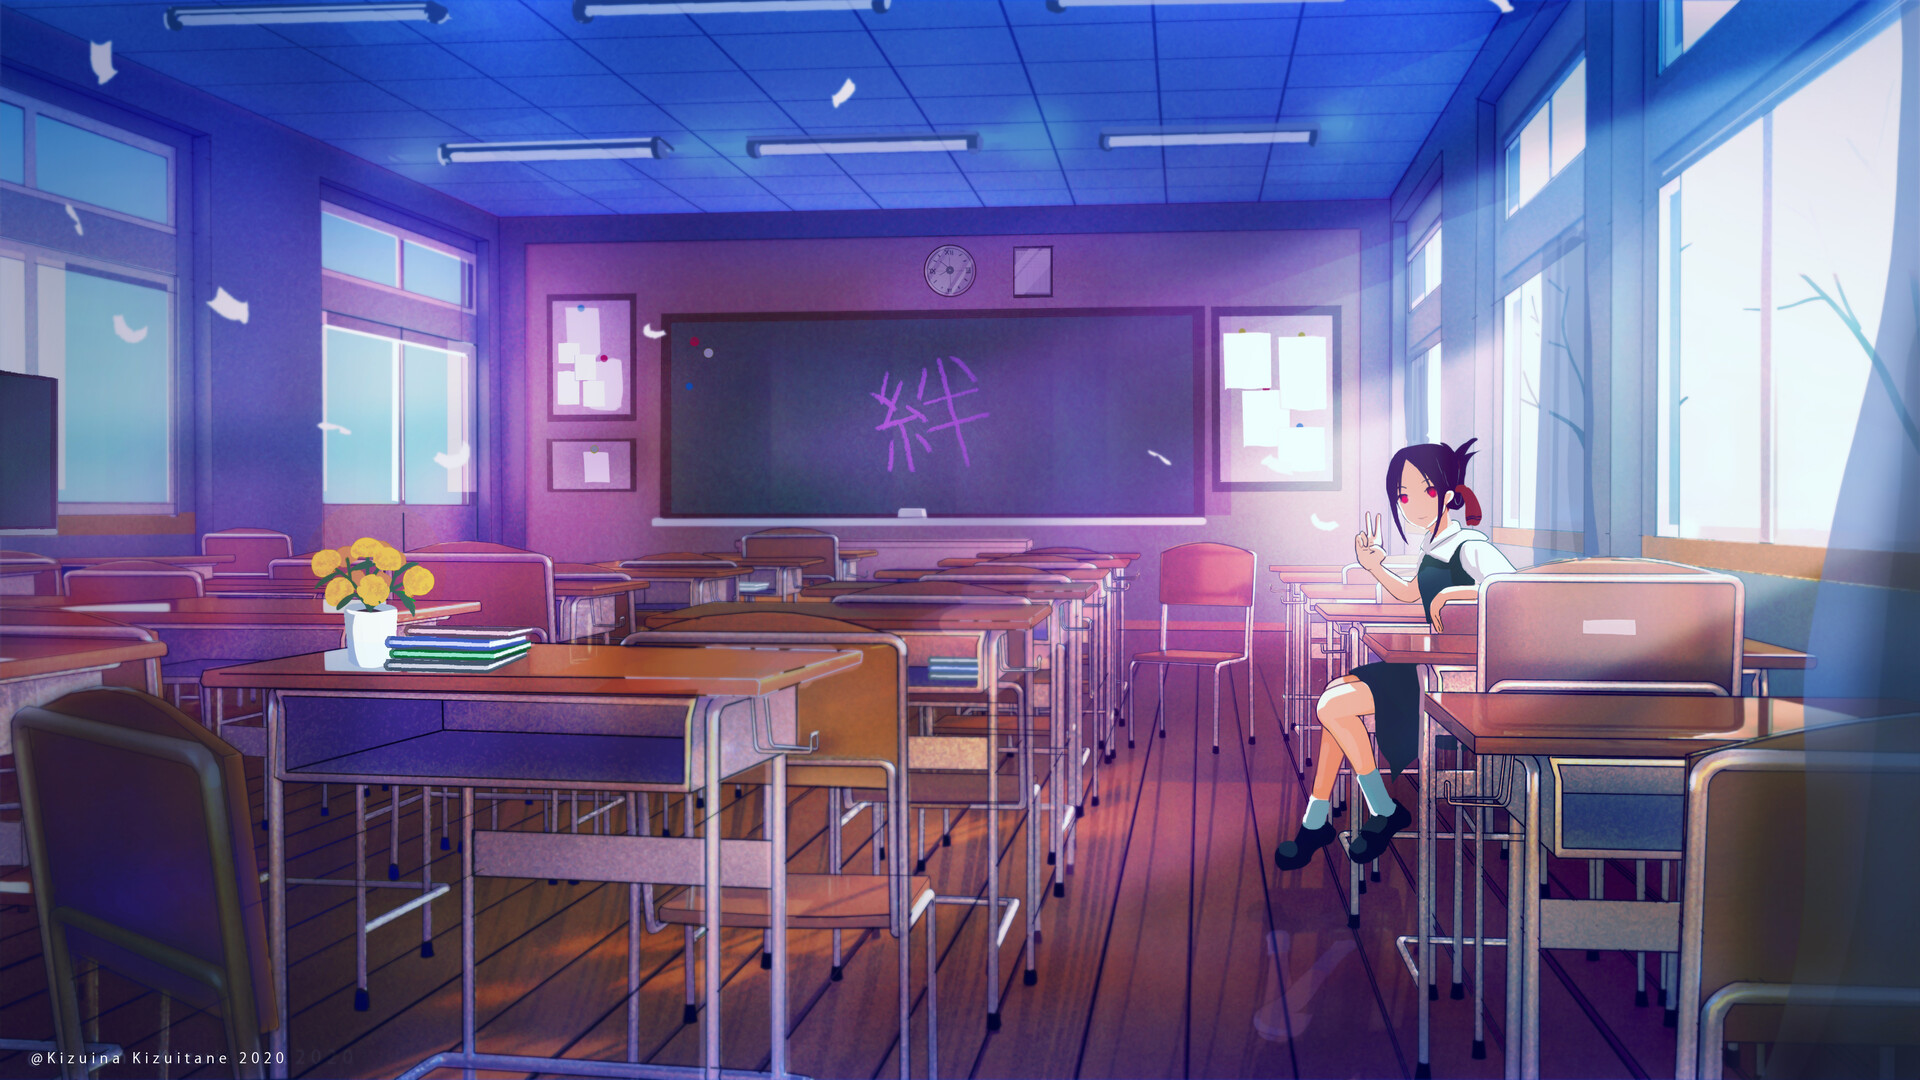 Anime Classroom - ruu.faa's Ko-fi Shop - Ko-fi ❤️ Where creators get  support from fans through donations, memberships, shop sales and more! The  original 'Buy Me a Coffee' Page.